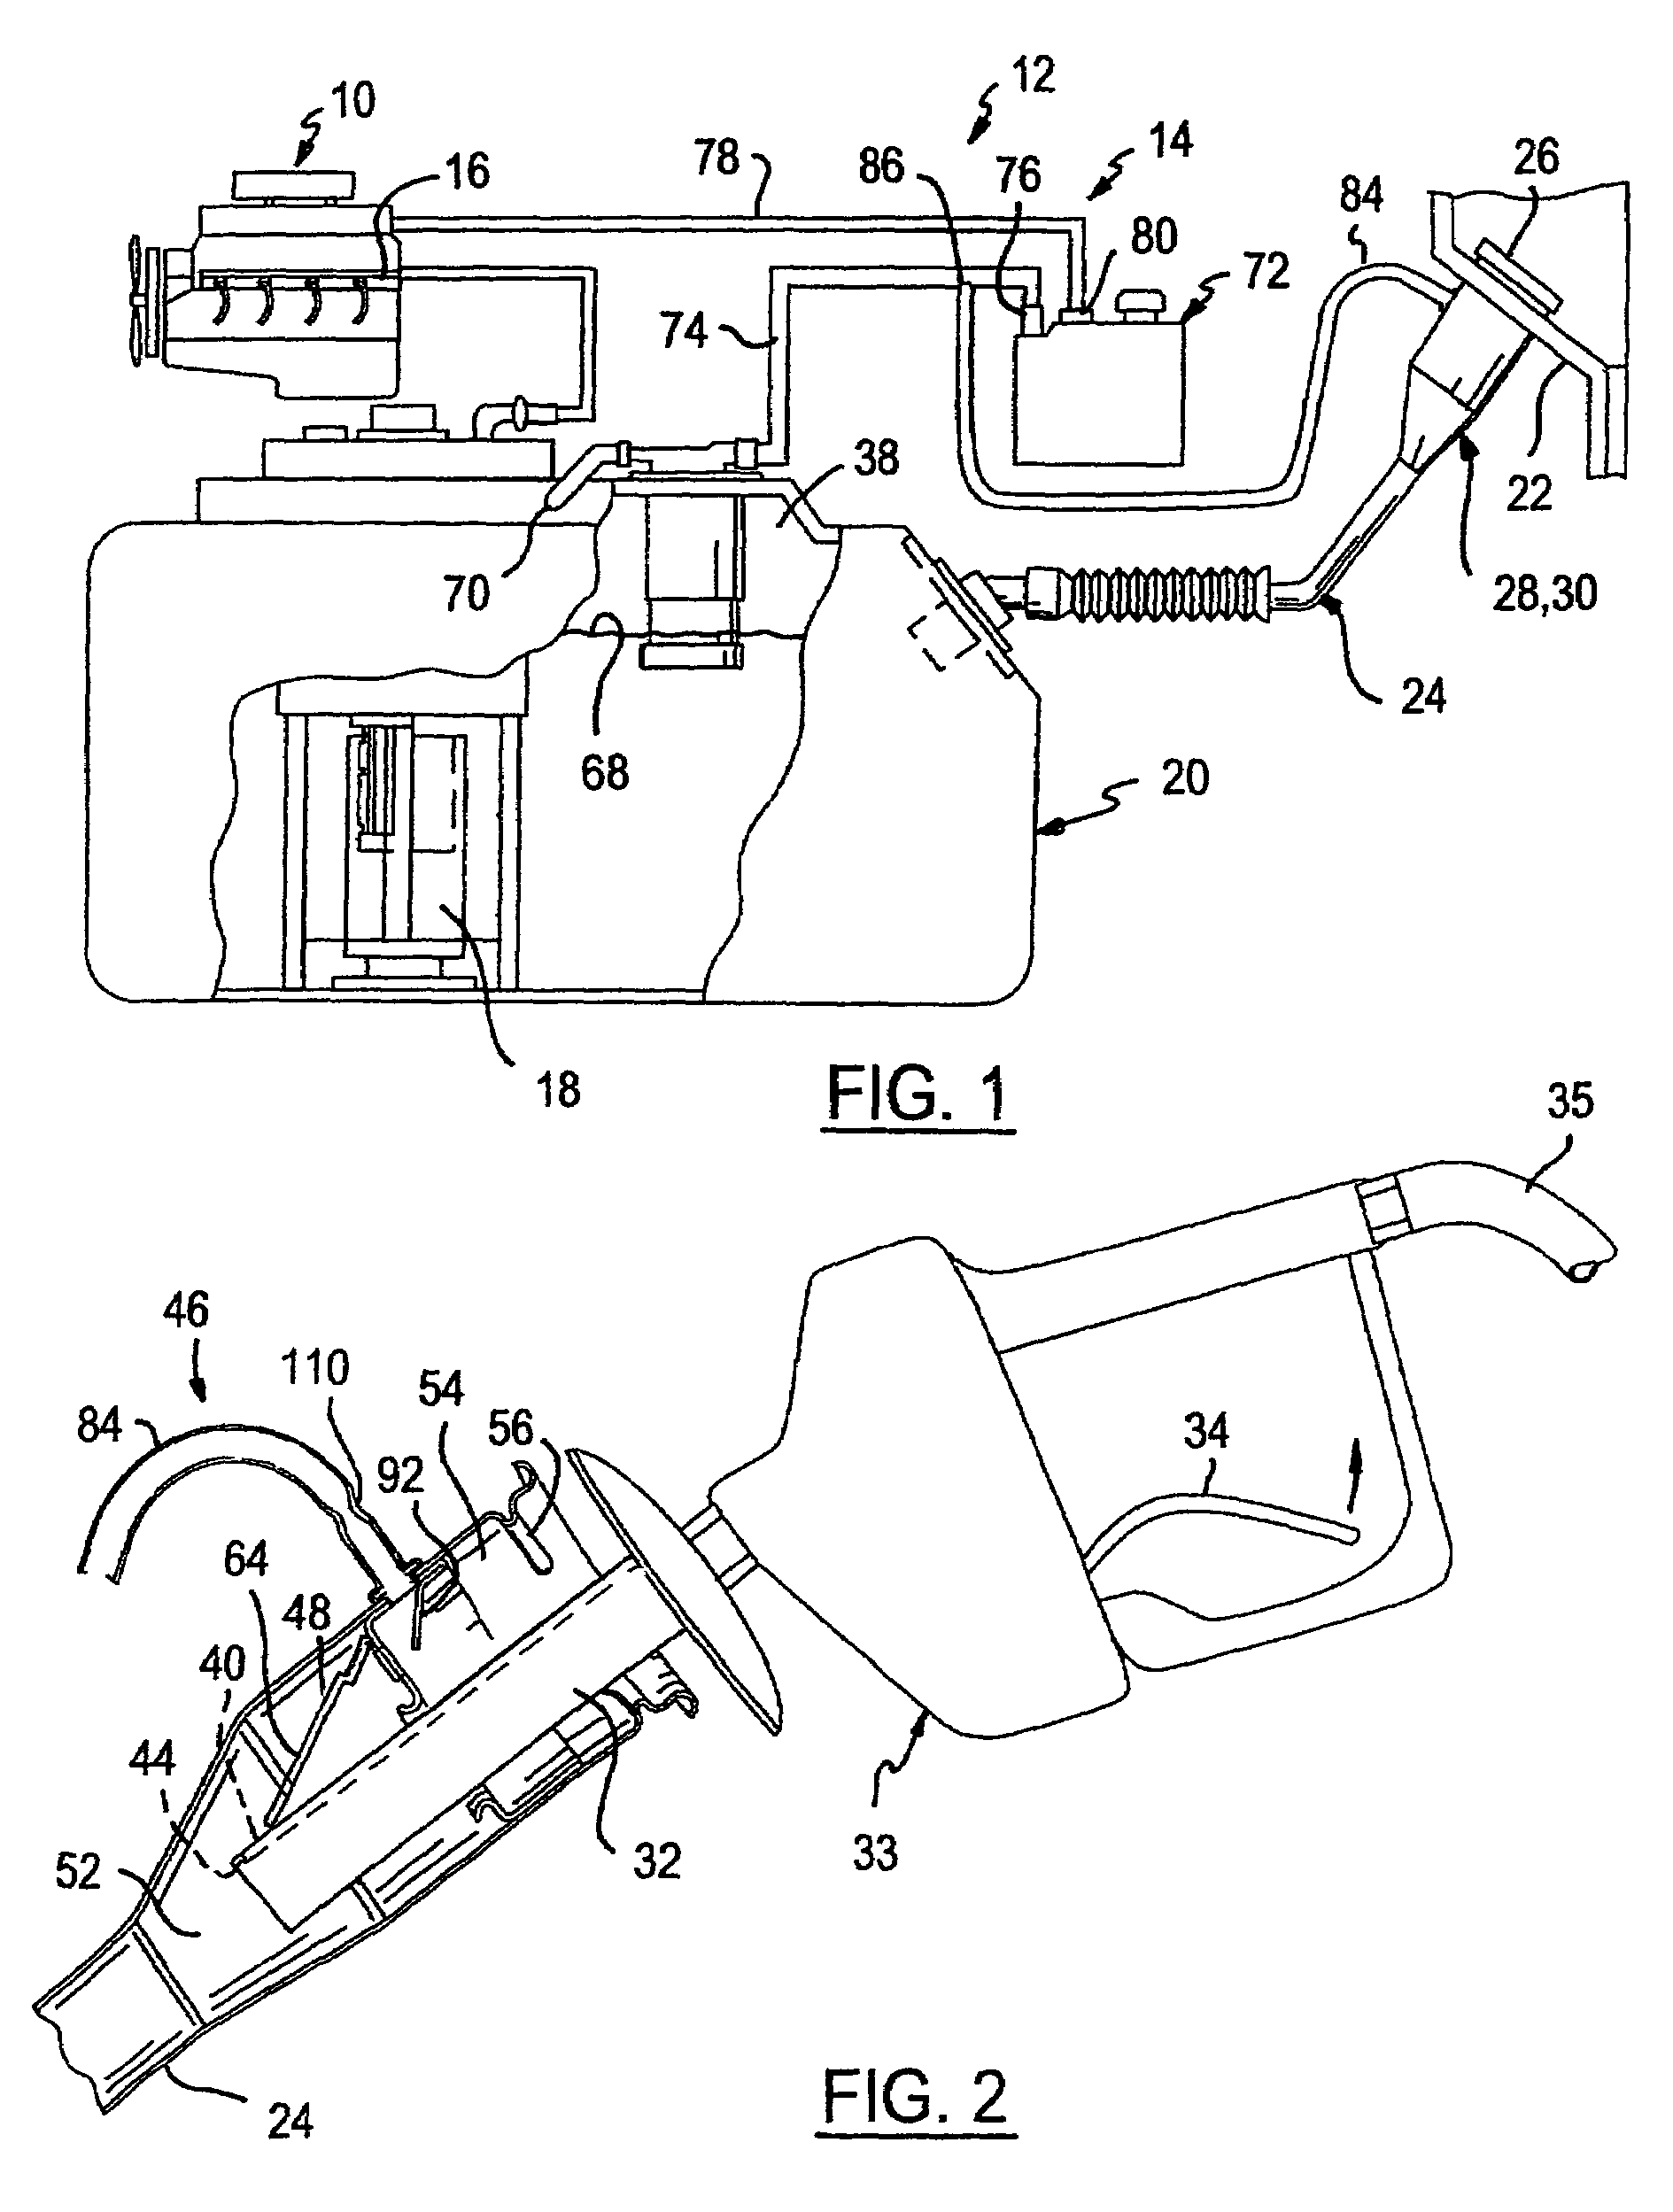 Refueling vapor recovery system